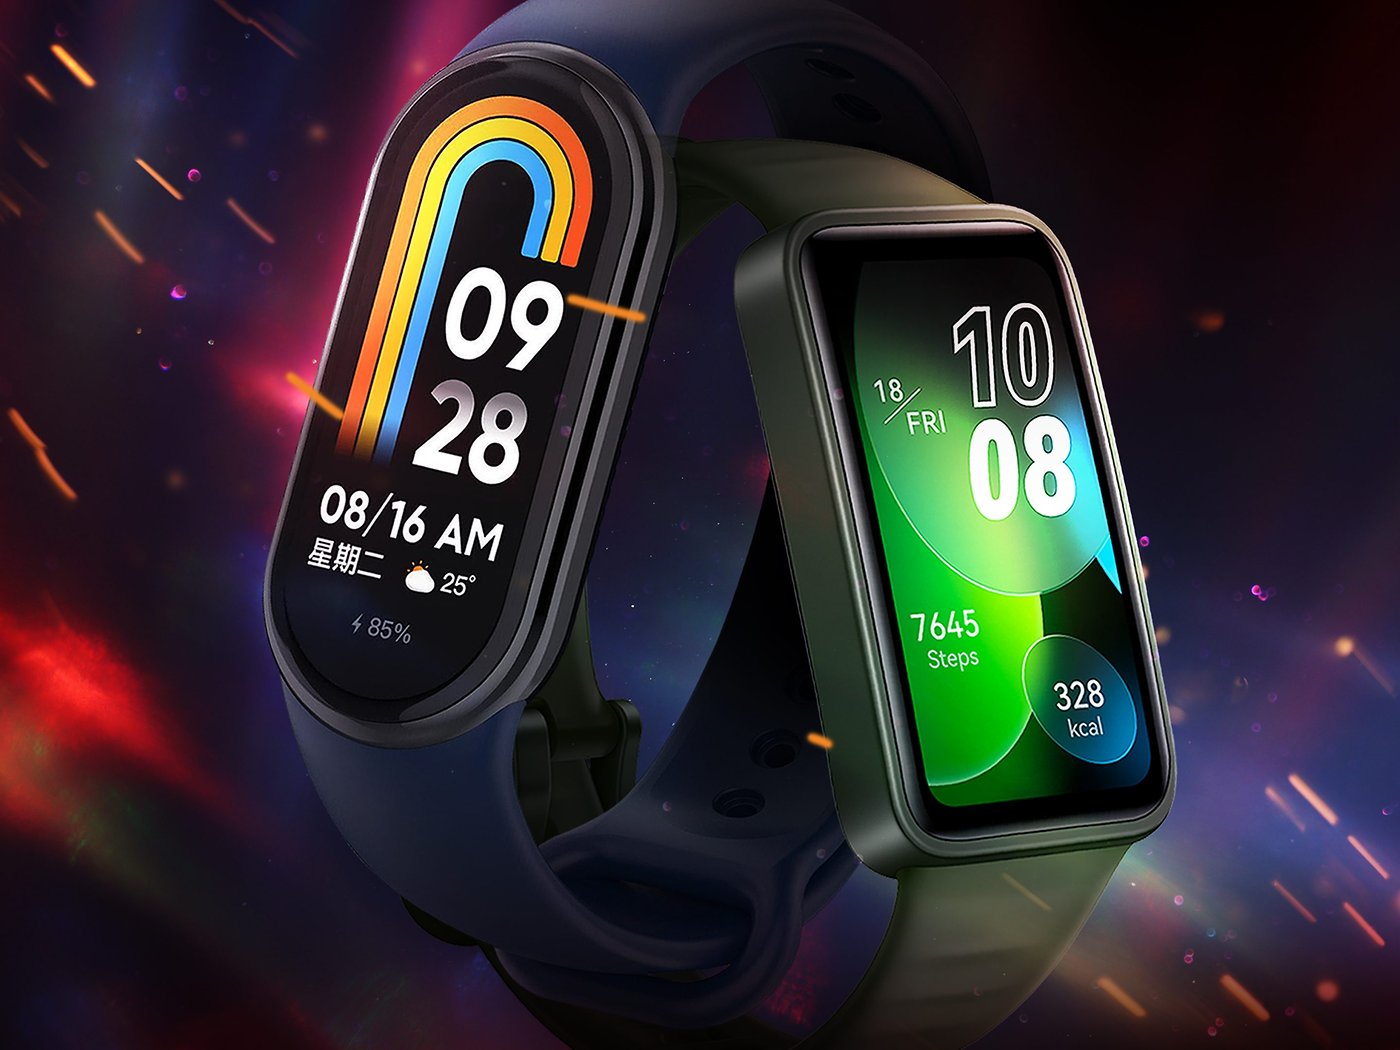 Xiaomi Mi Band 6 vs. Huawei Band 6: Which is the better tracker?